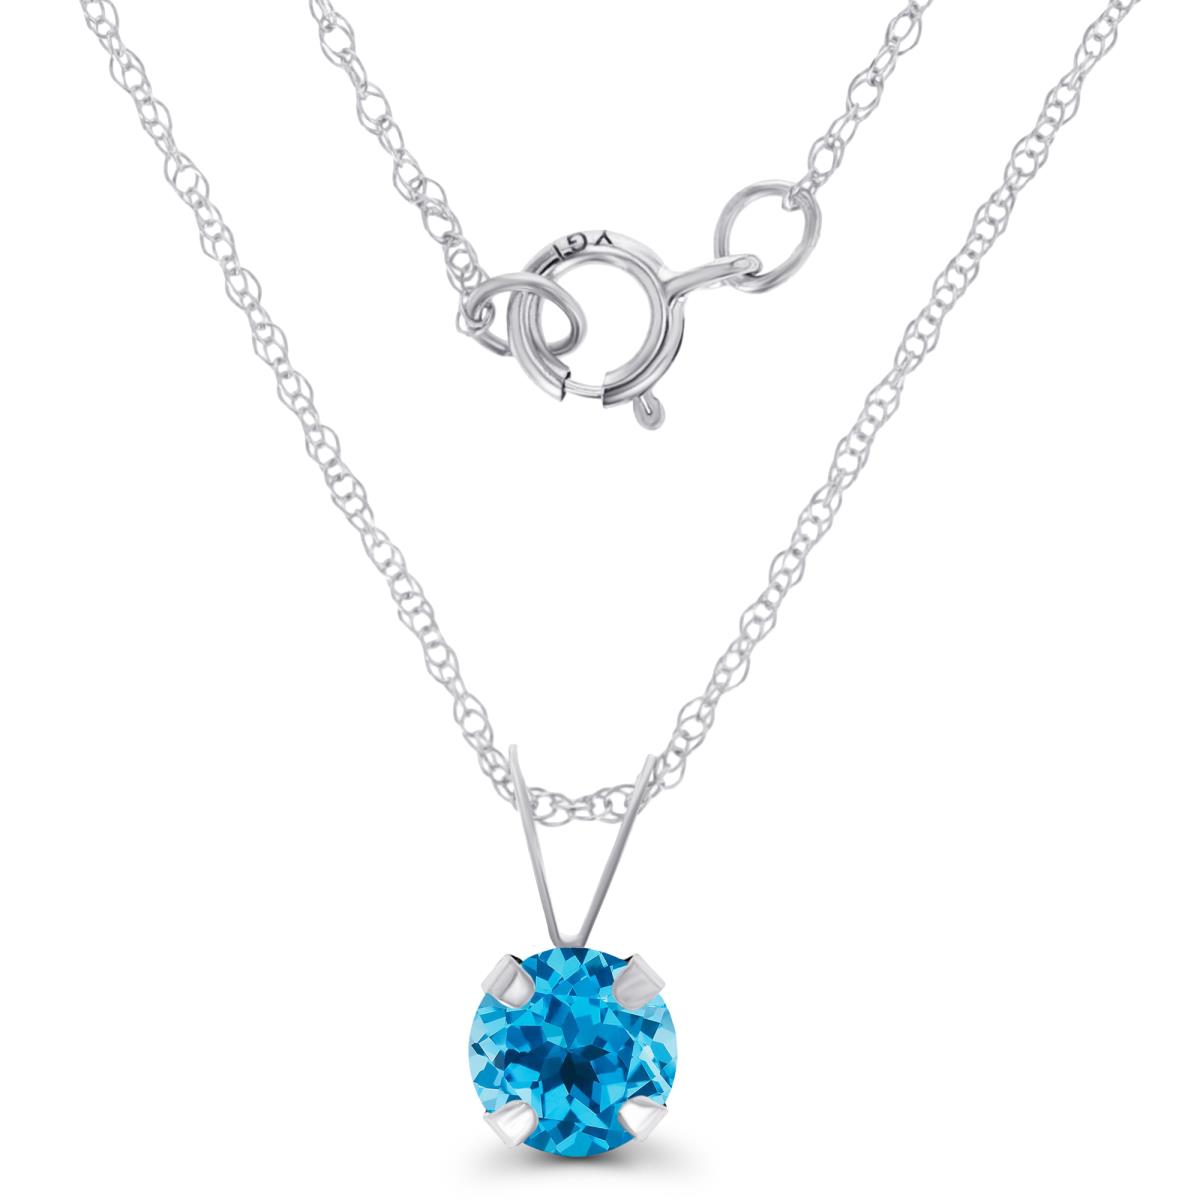 14K White Gold 5mm Round Swiss Blue Topaz 18" Rope Chain Necklace